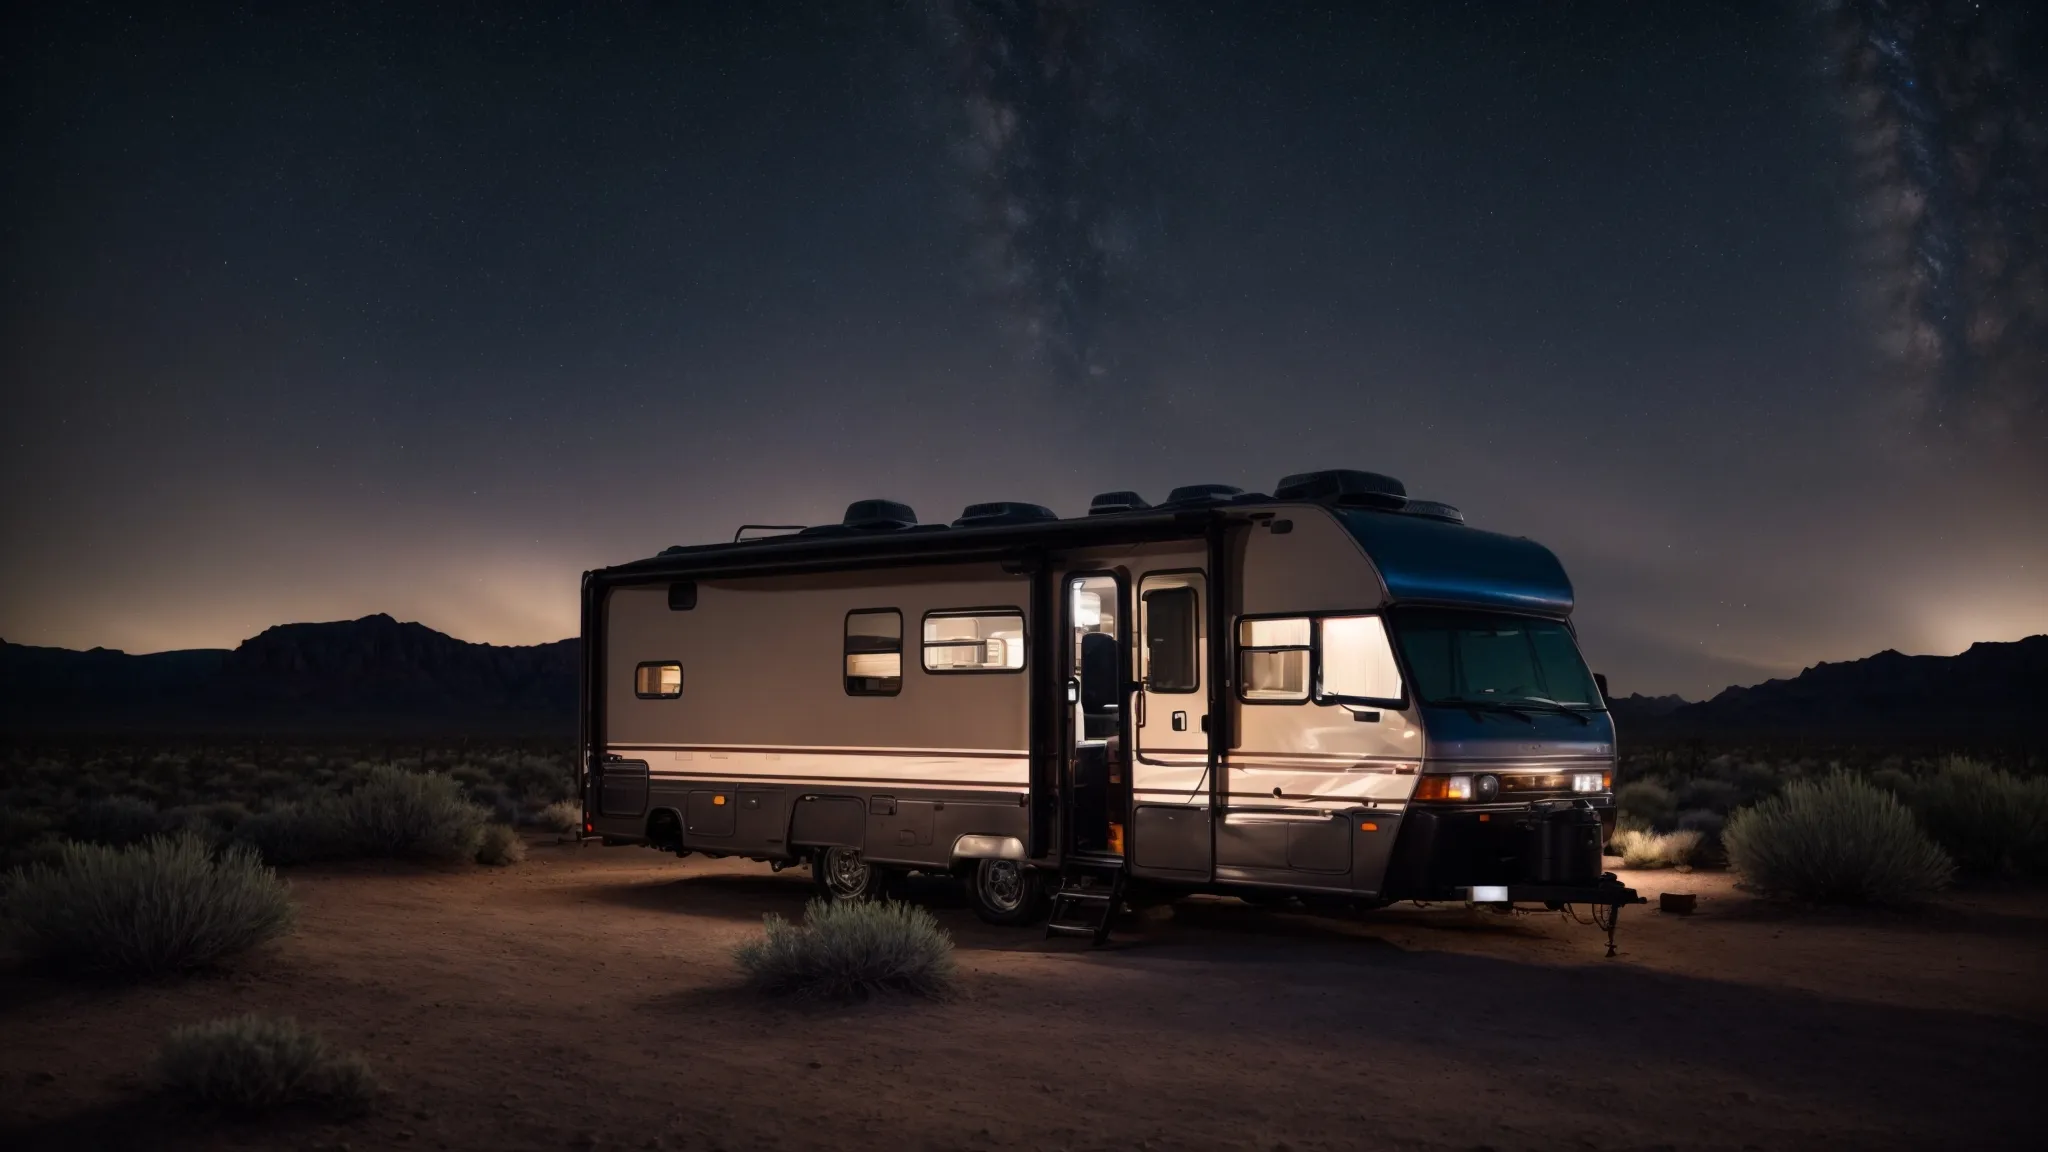 an rv sits secluded amidst rugged desert terrain under a vast sky shimmering with stars.